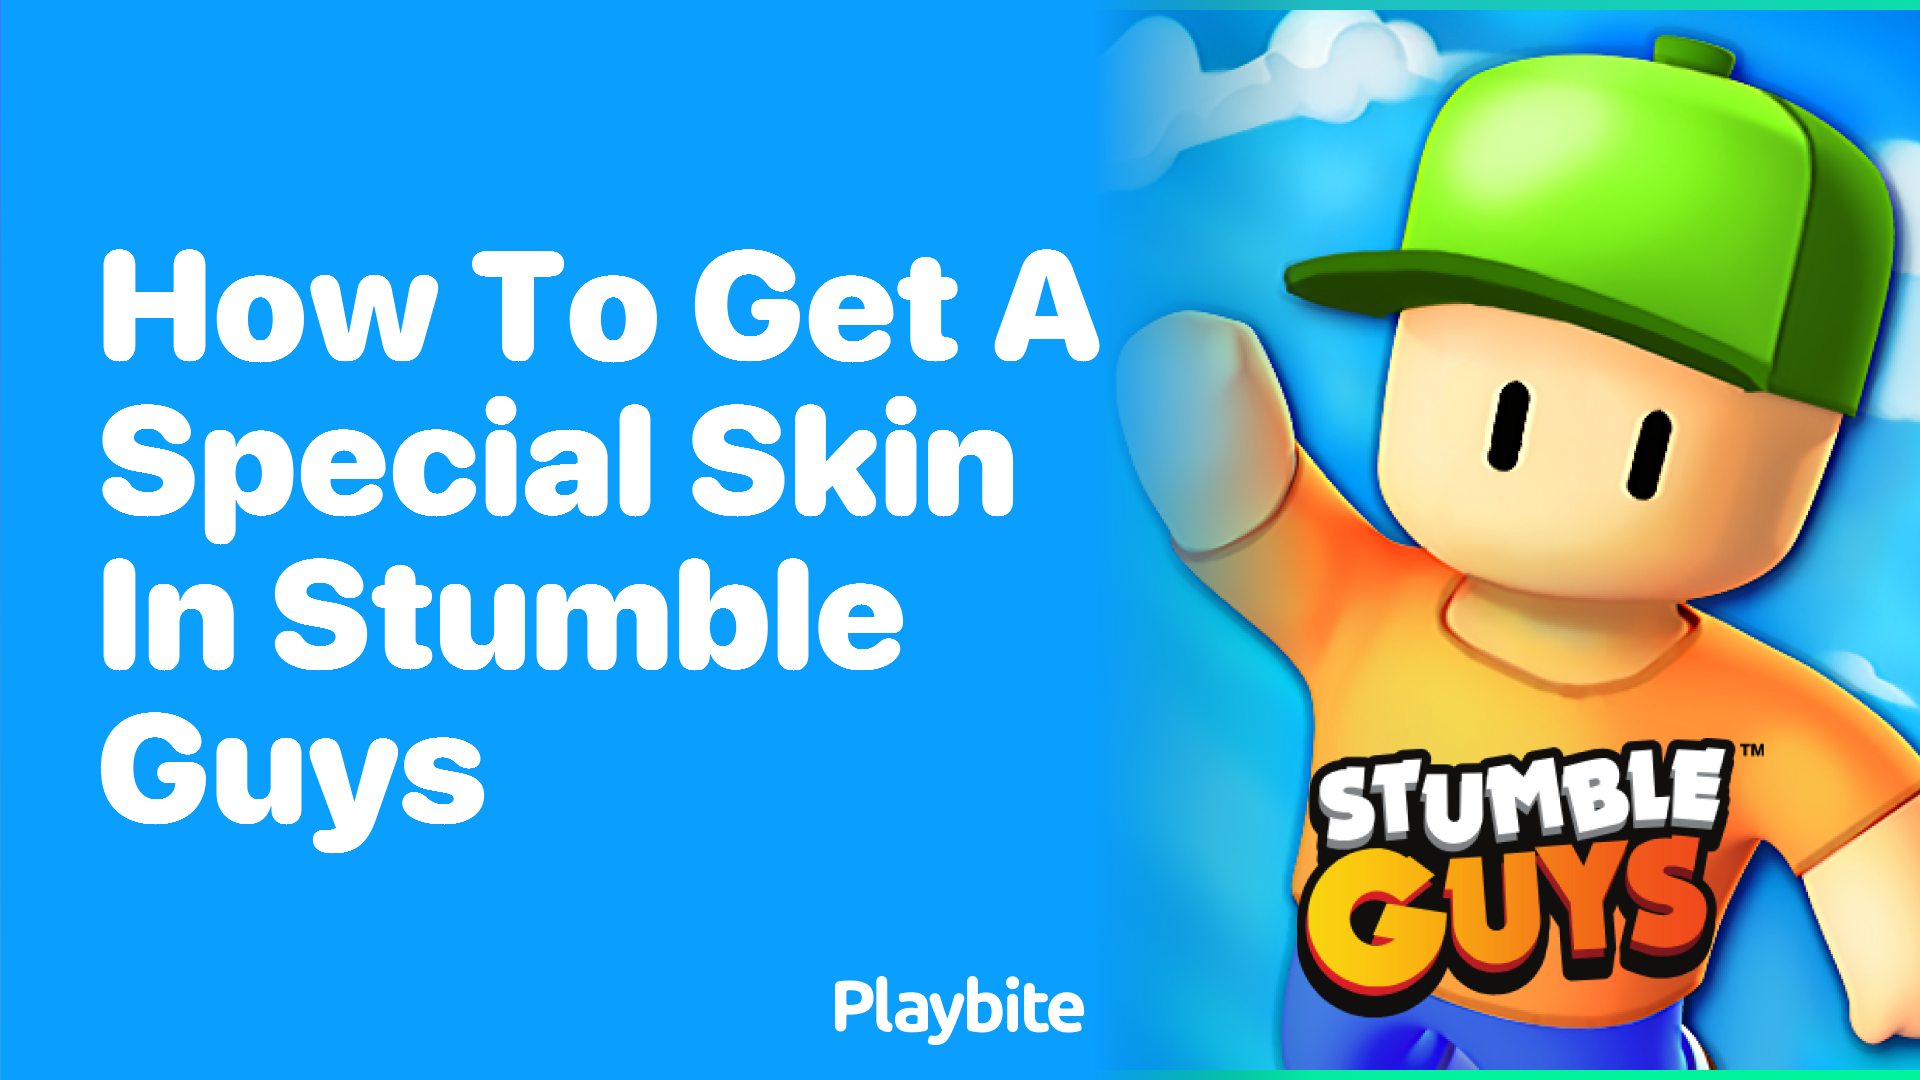 How to Get a Special Skin in Stumble Guys